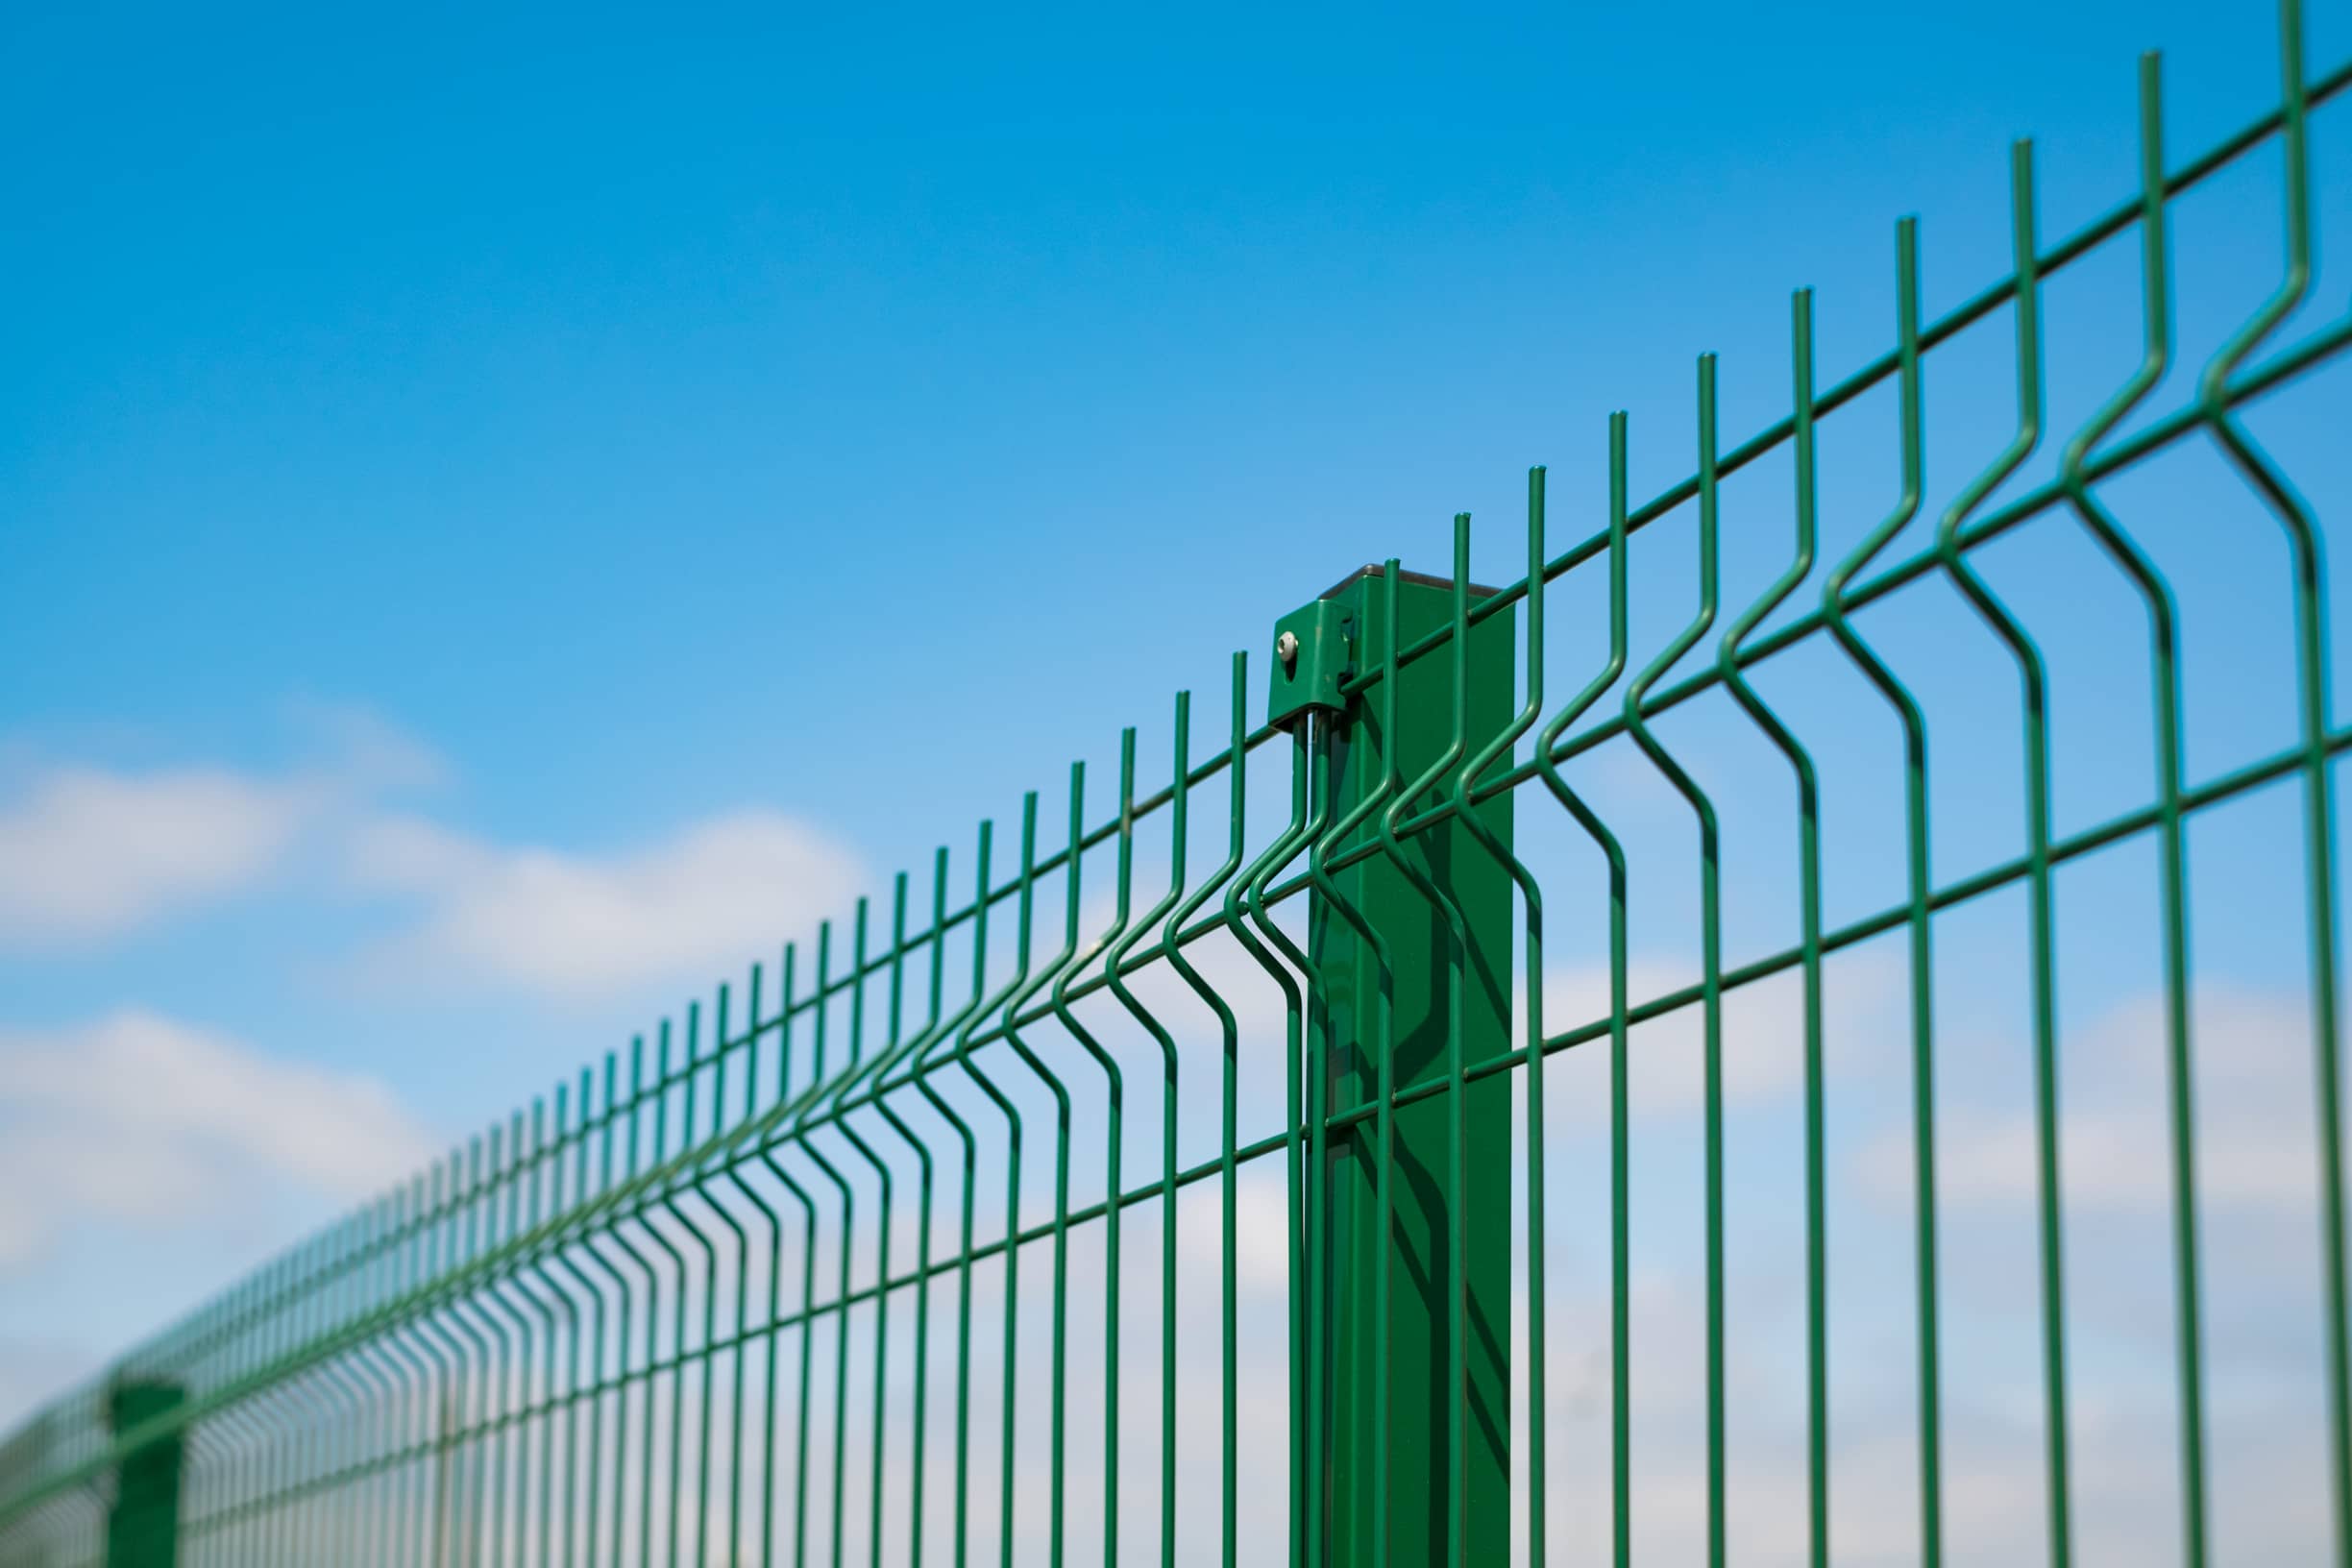 This image shows a green wire metal fence.